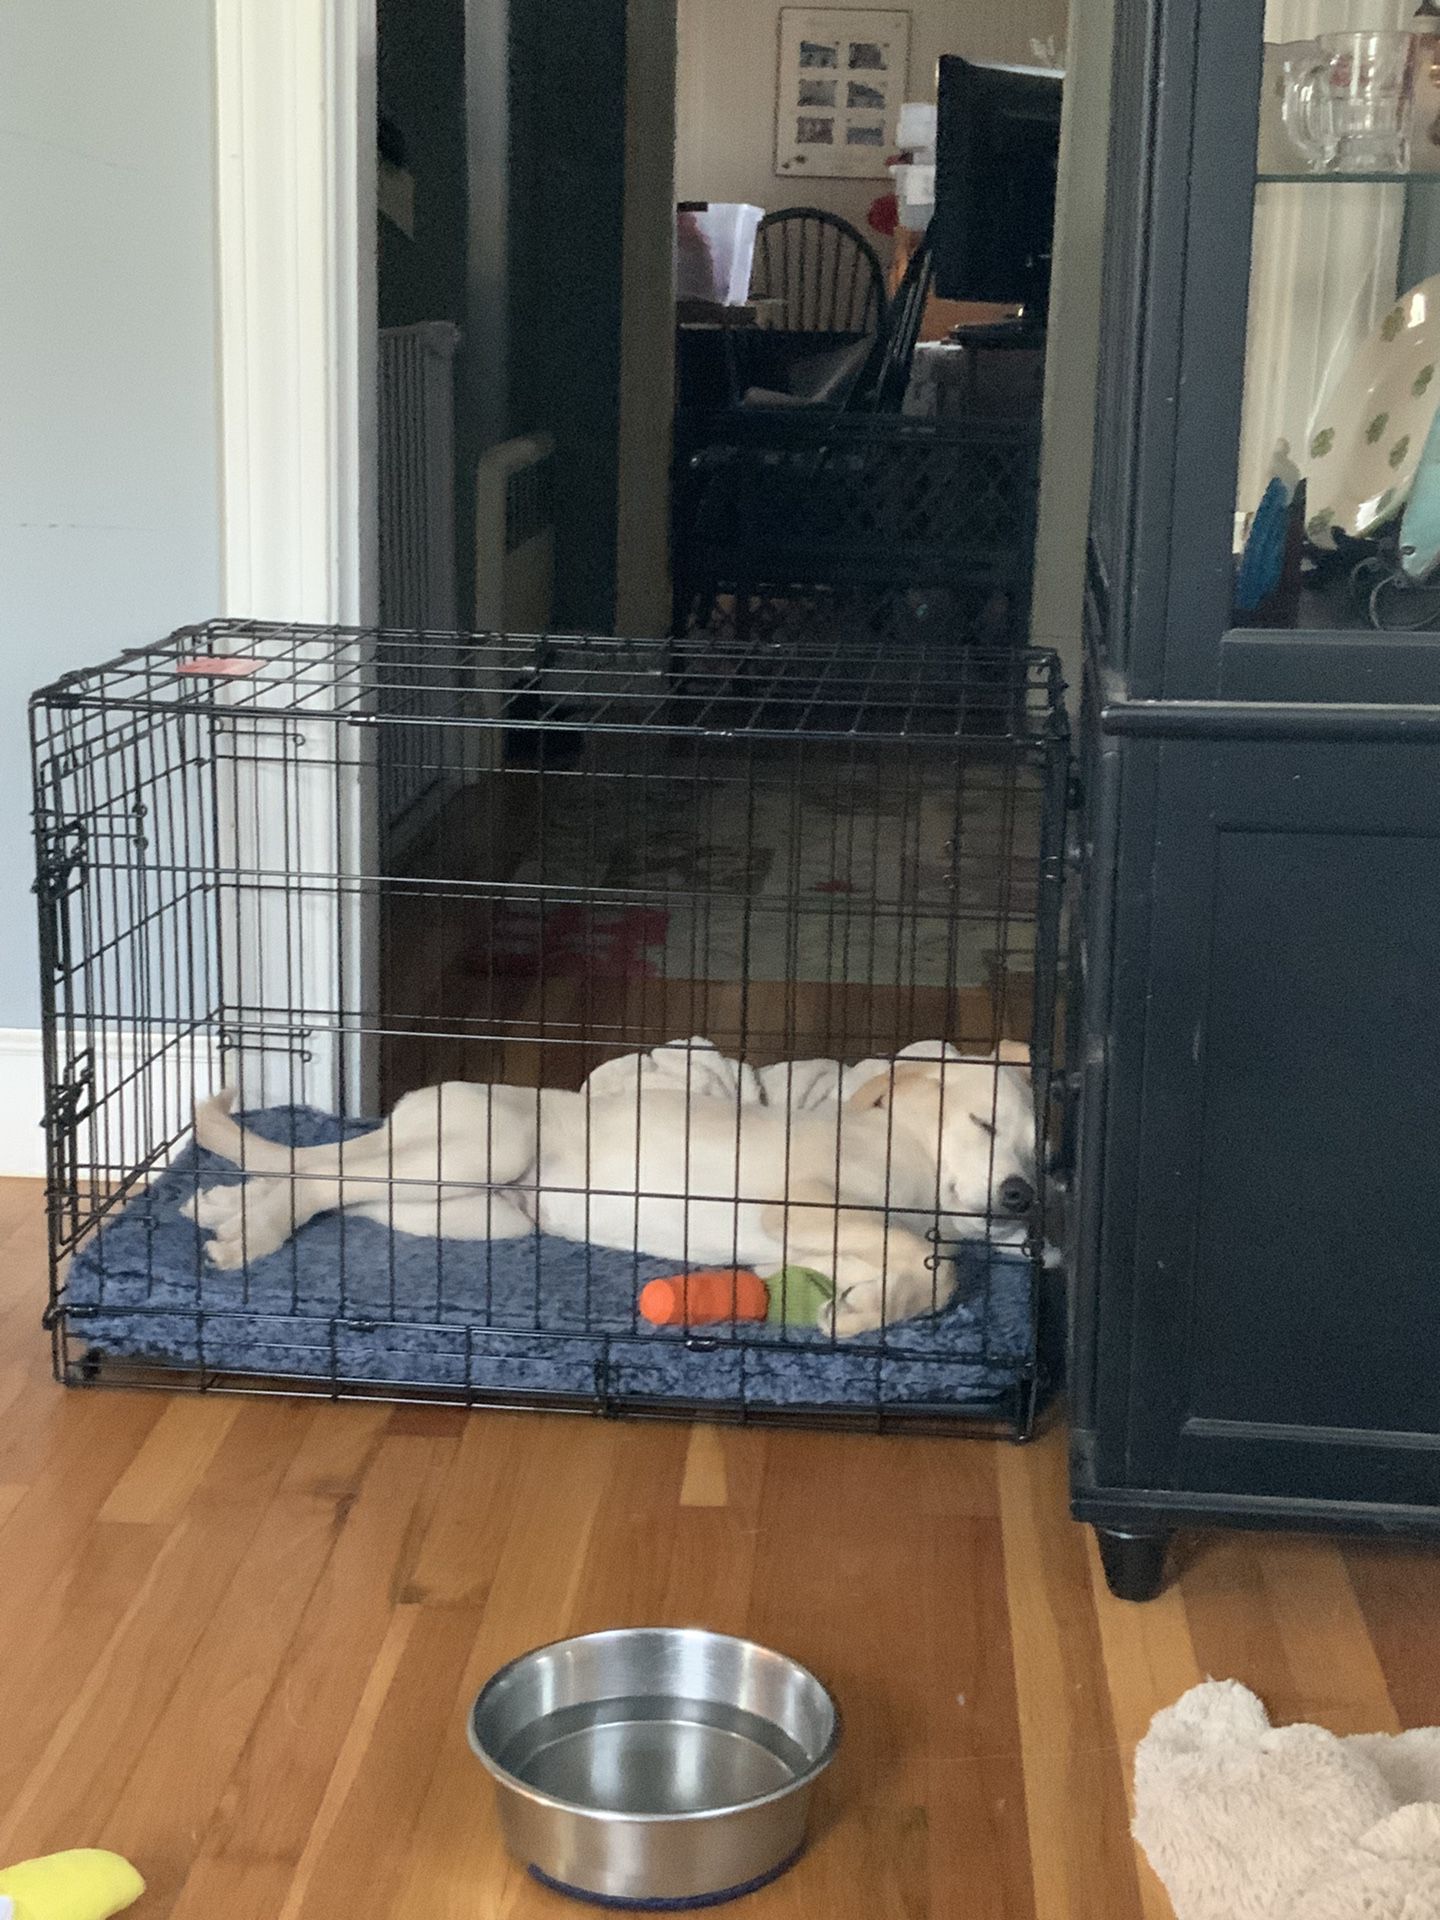 32 Inch Dog Crate. Dog Not Included!! 😊